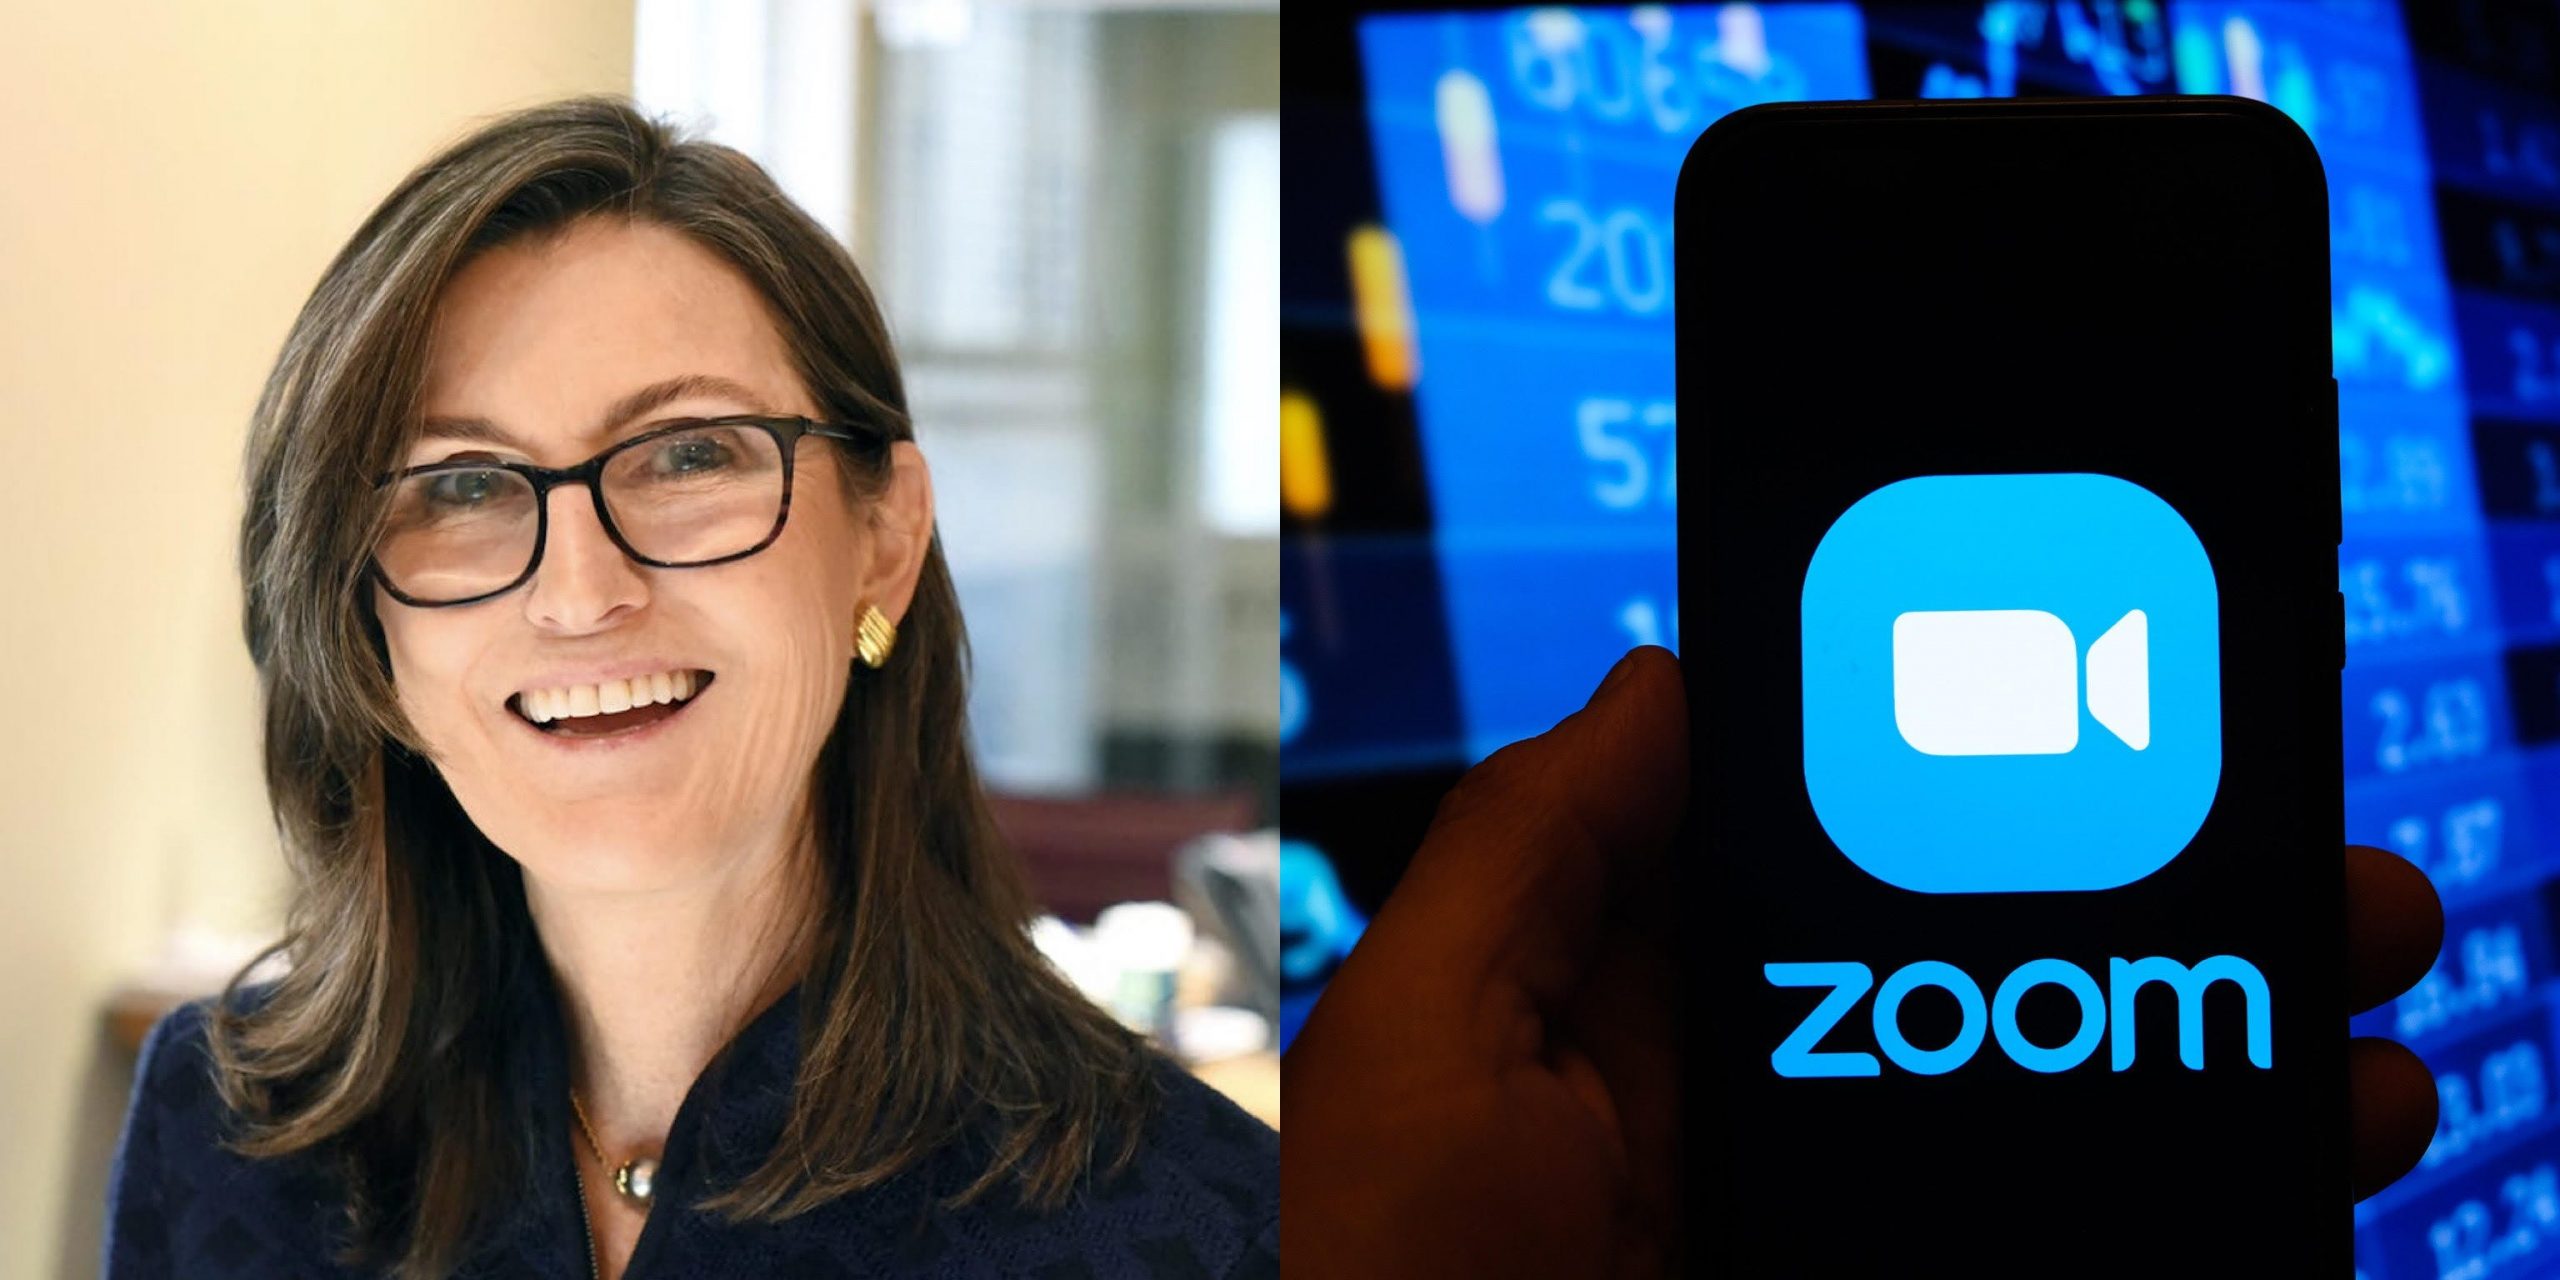 In this photo illustration a multiple exposure image shows a Zoom video logo displayed on a smartphone with stock market percentages in the background.